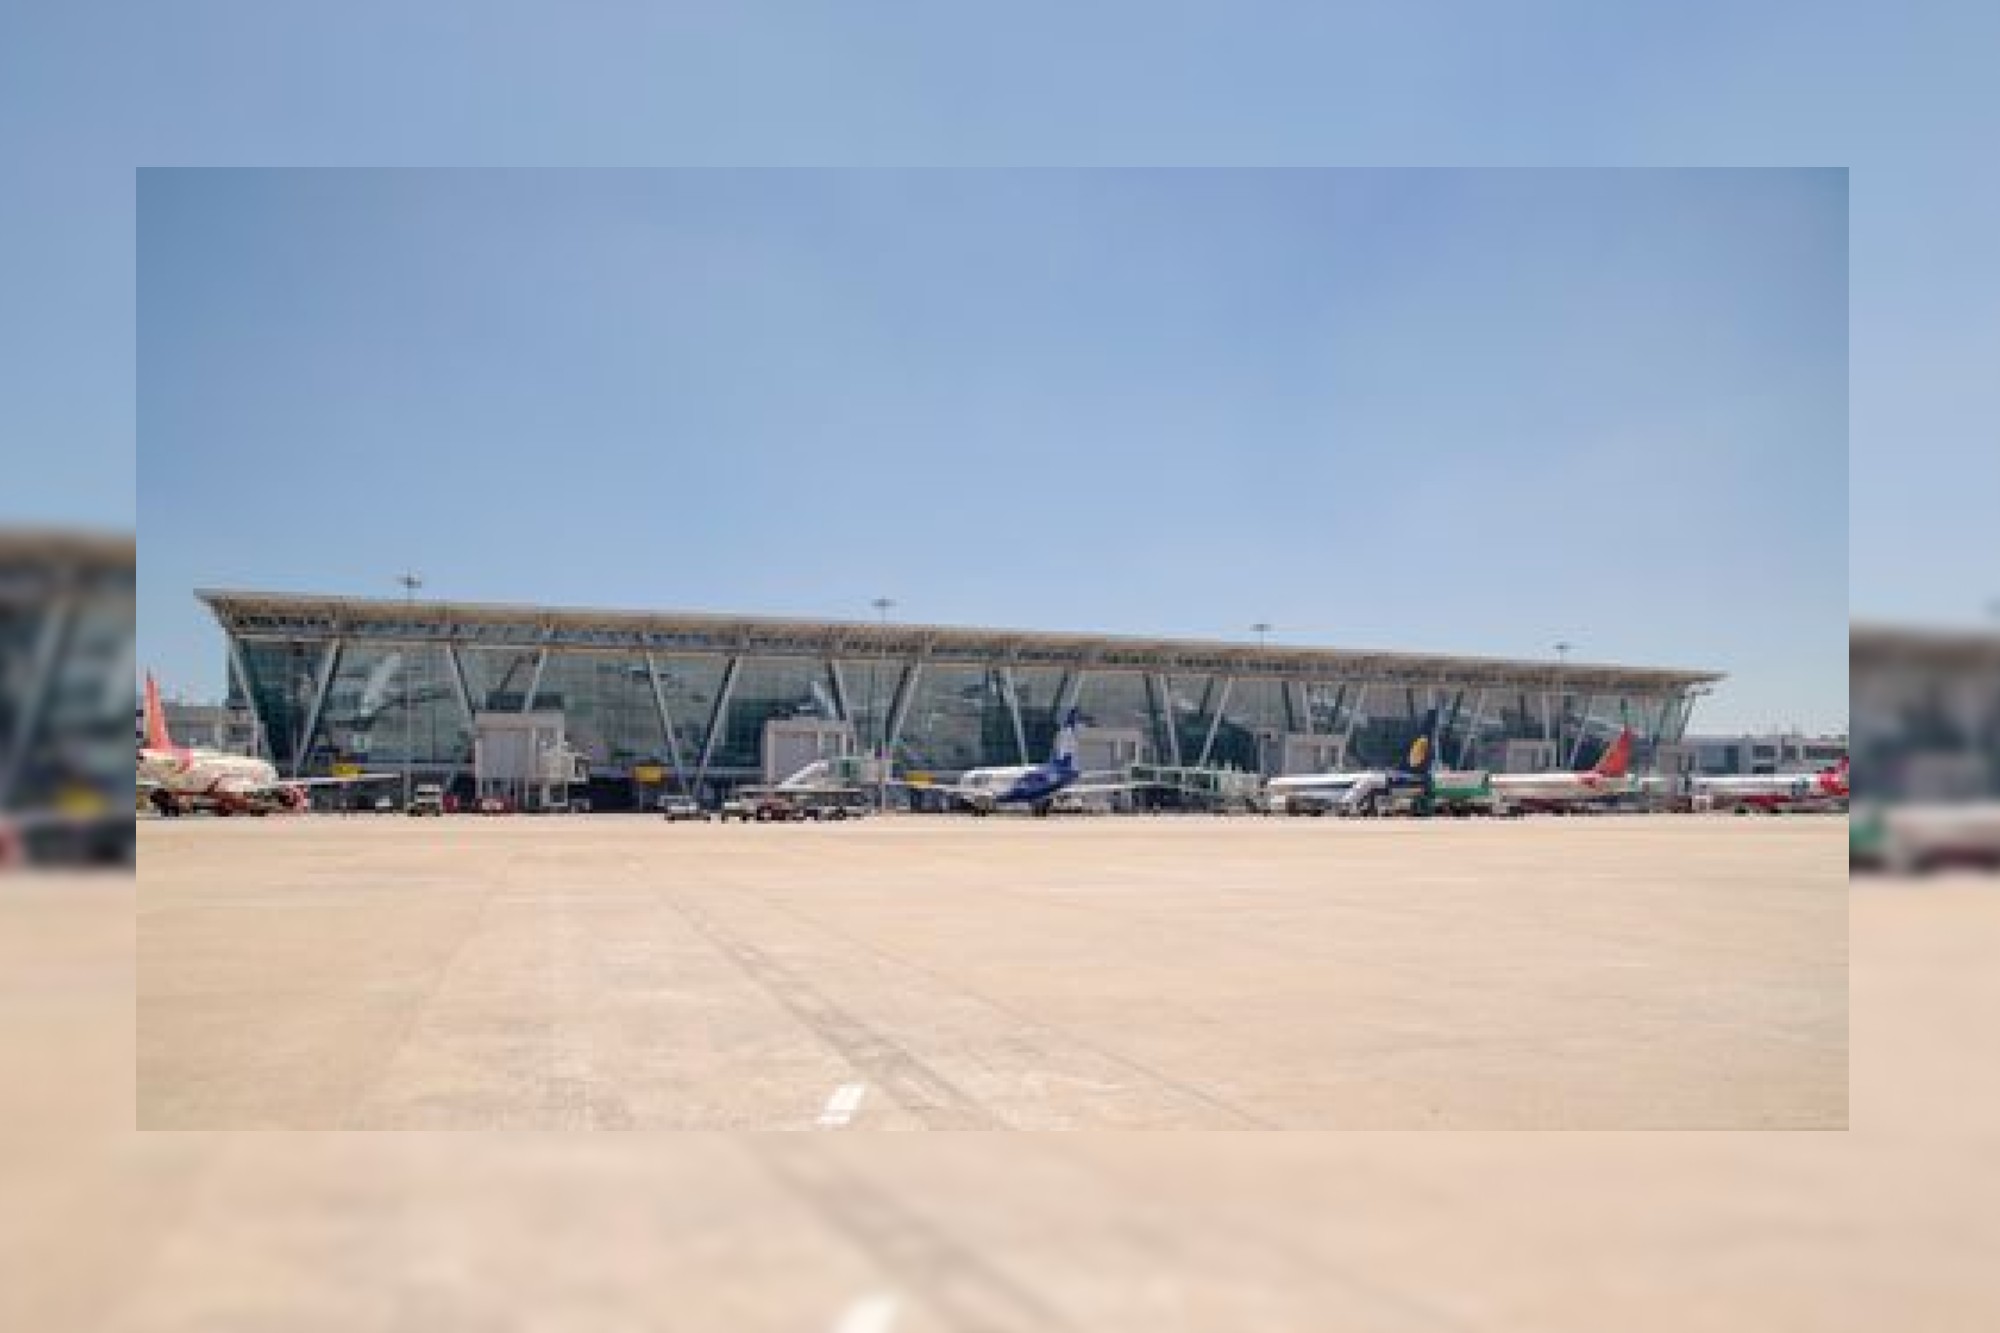 Chennai is set to bolster its aviation infrastructure with the development of a second airport in Parandur, Tamil Nadu, spanning 5,368.93 acres.